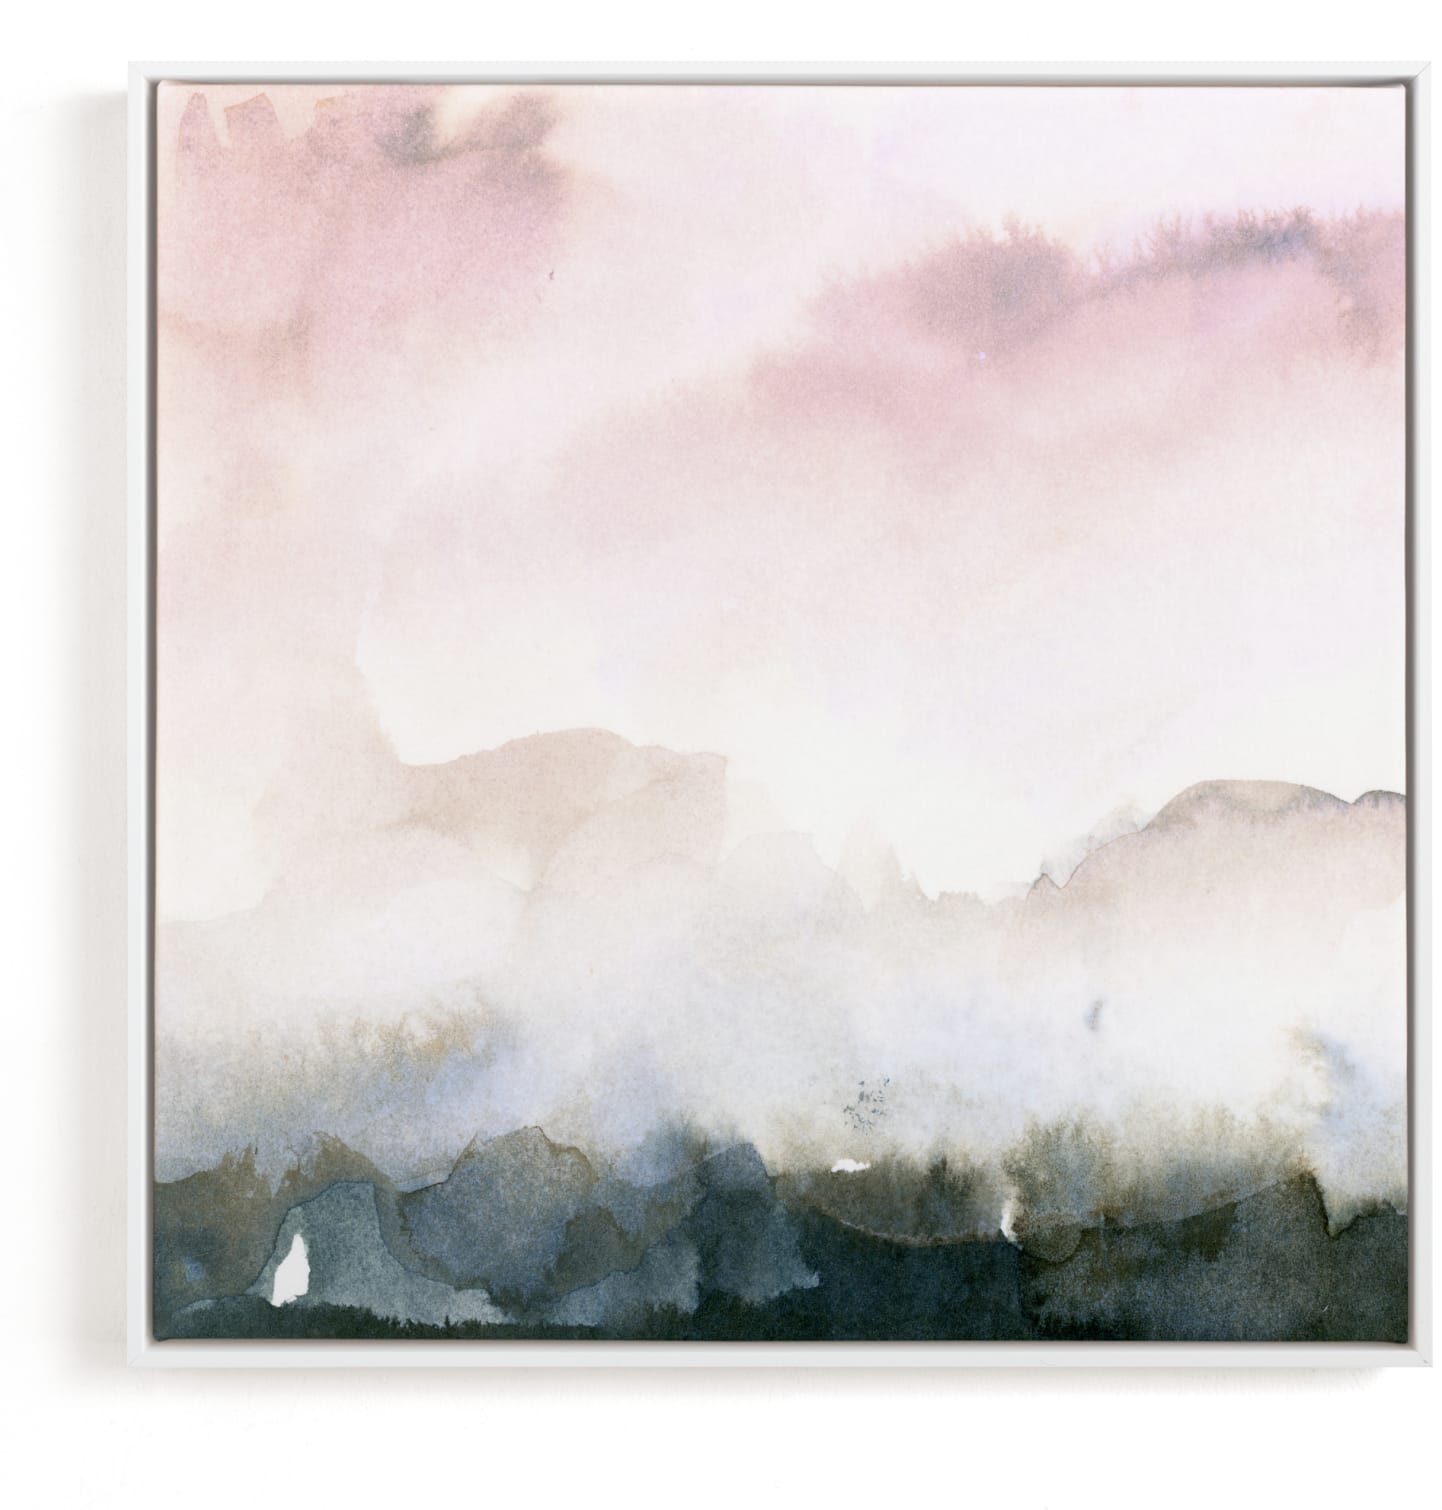 This is a white art by Lindsay Megahed called Wake II.